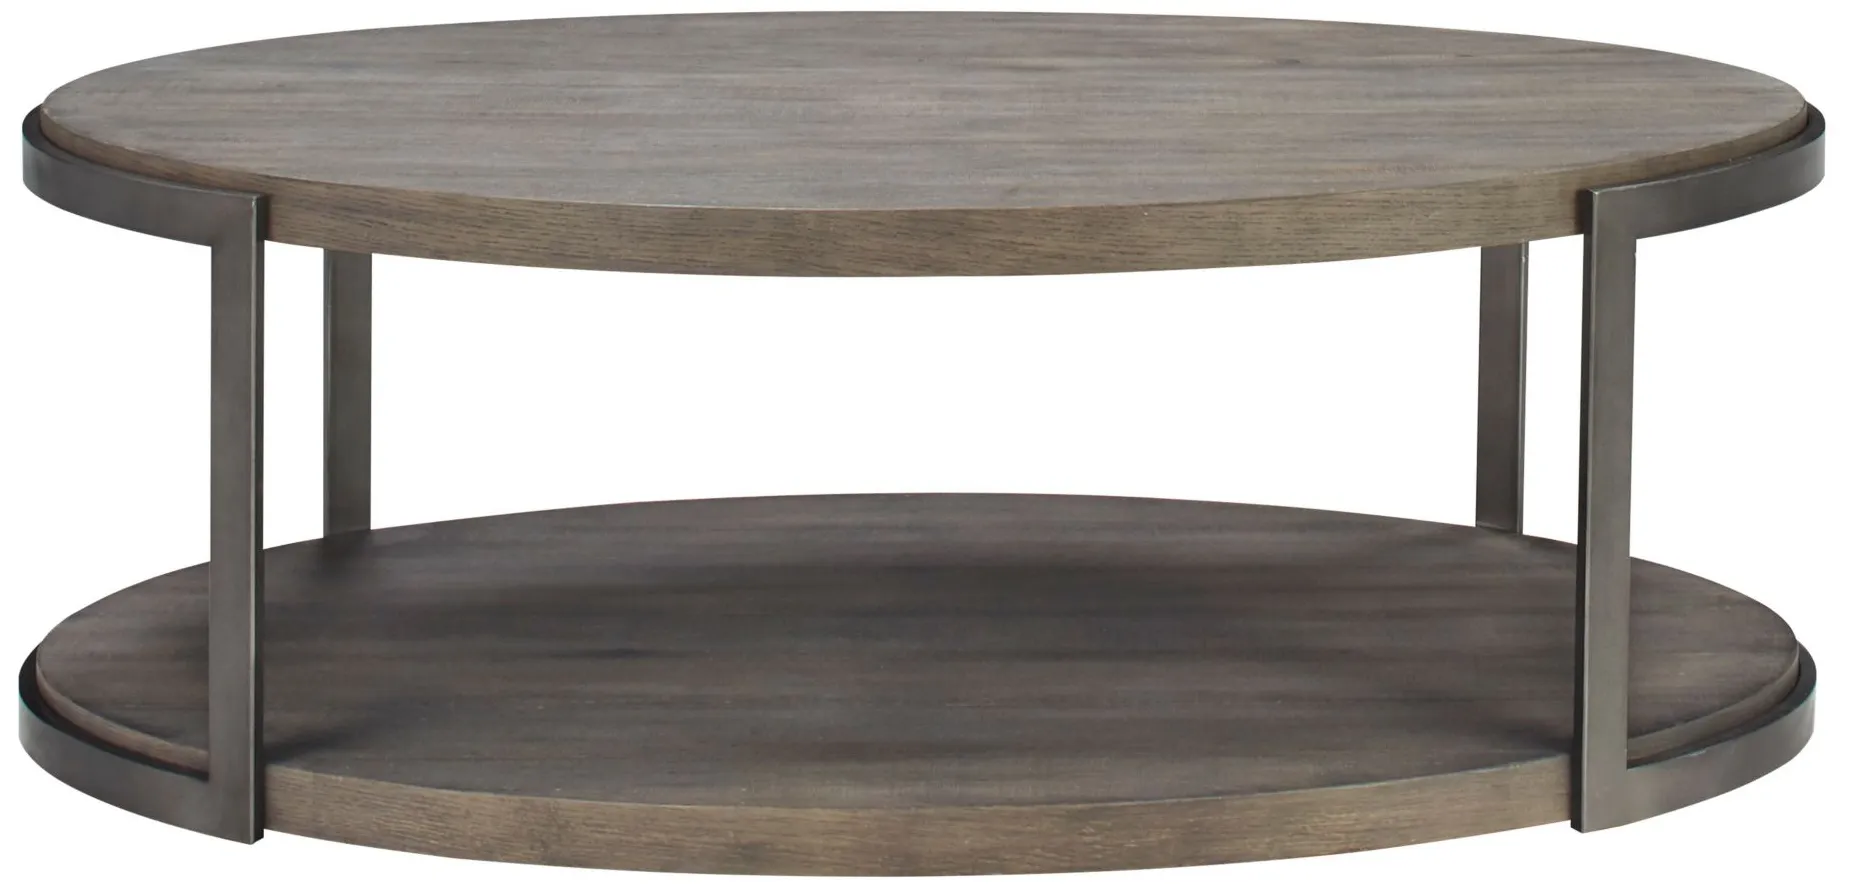 Lucinda 2-pc. Cocktail Table in Gauntlet Gray by Liberty Furniture